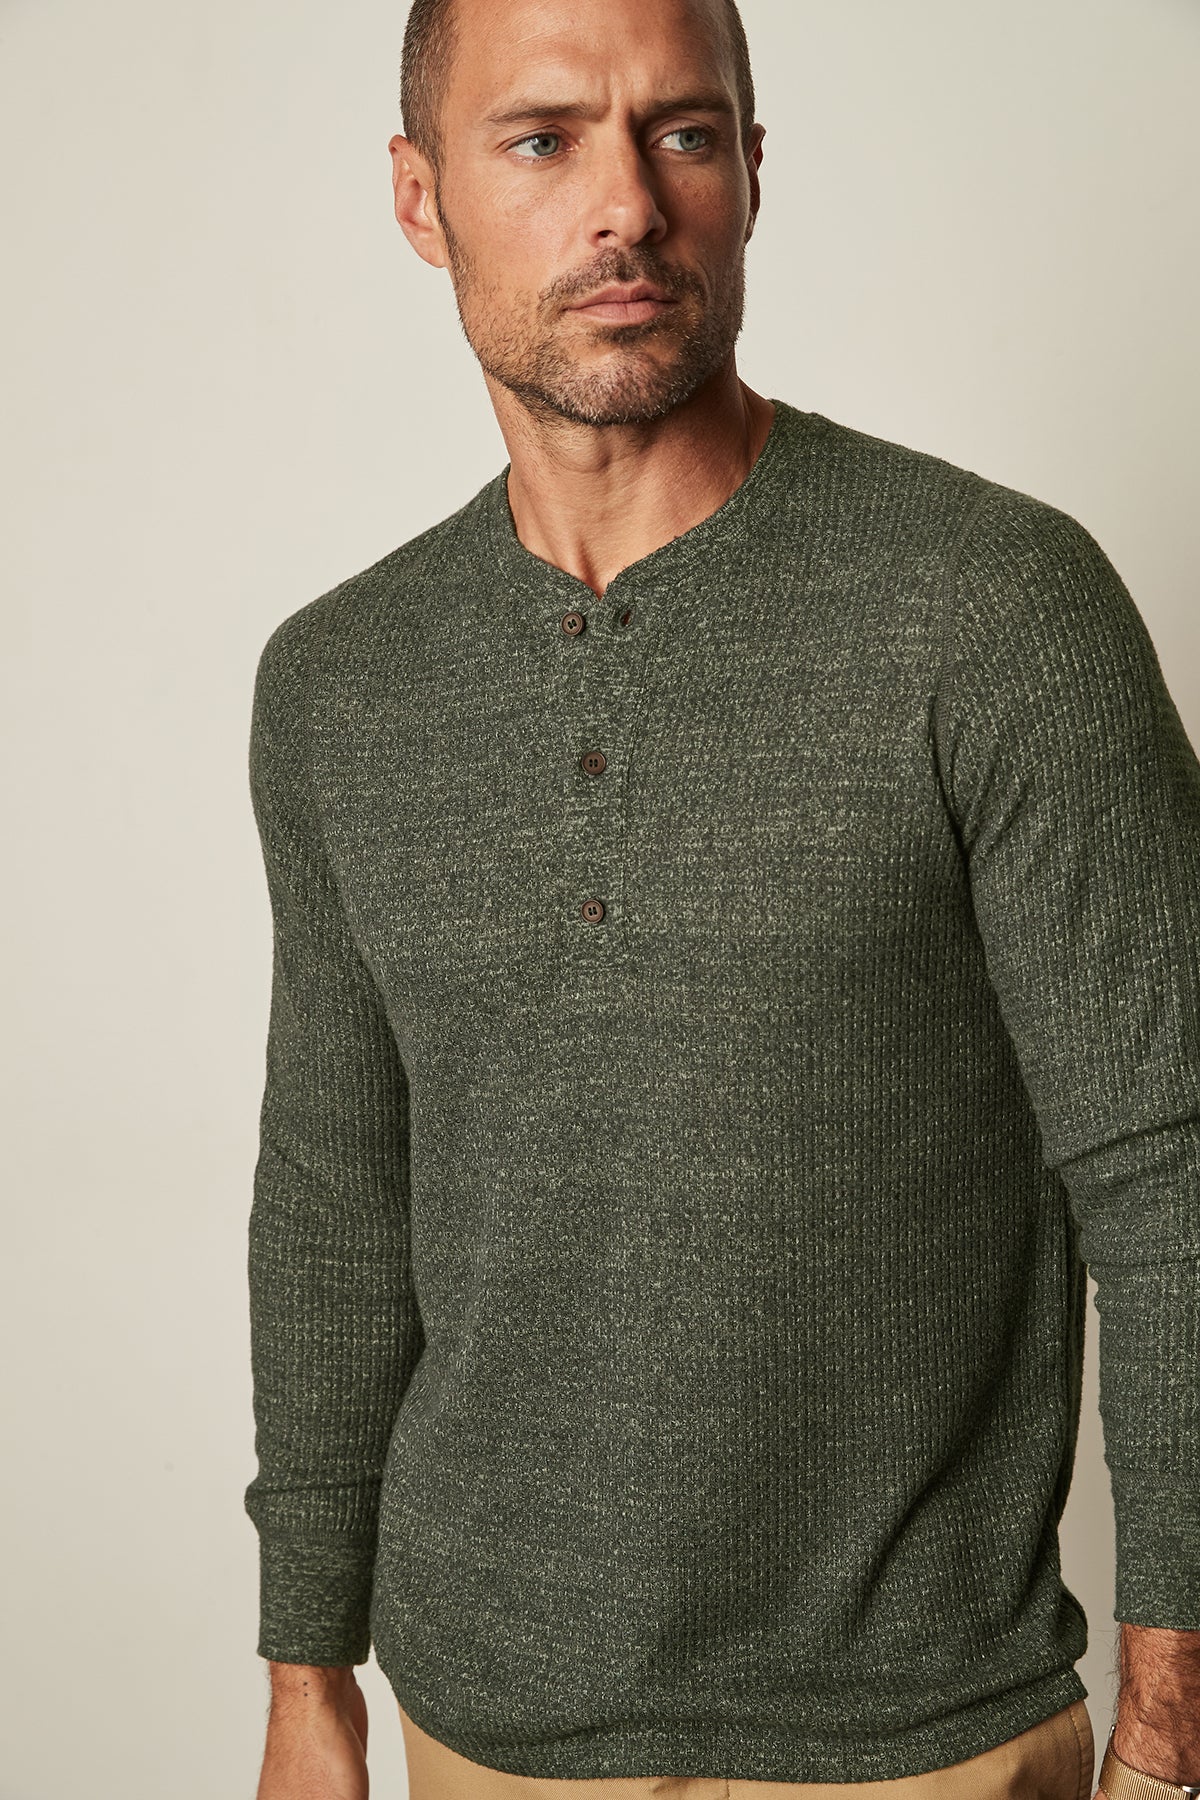 Anthony Thermal Henley front detail moss green-25483957534913